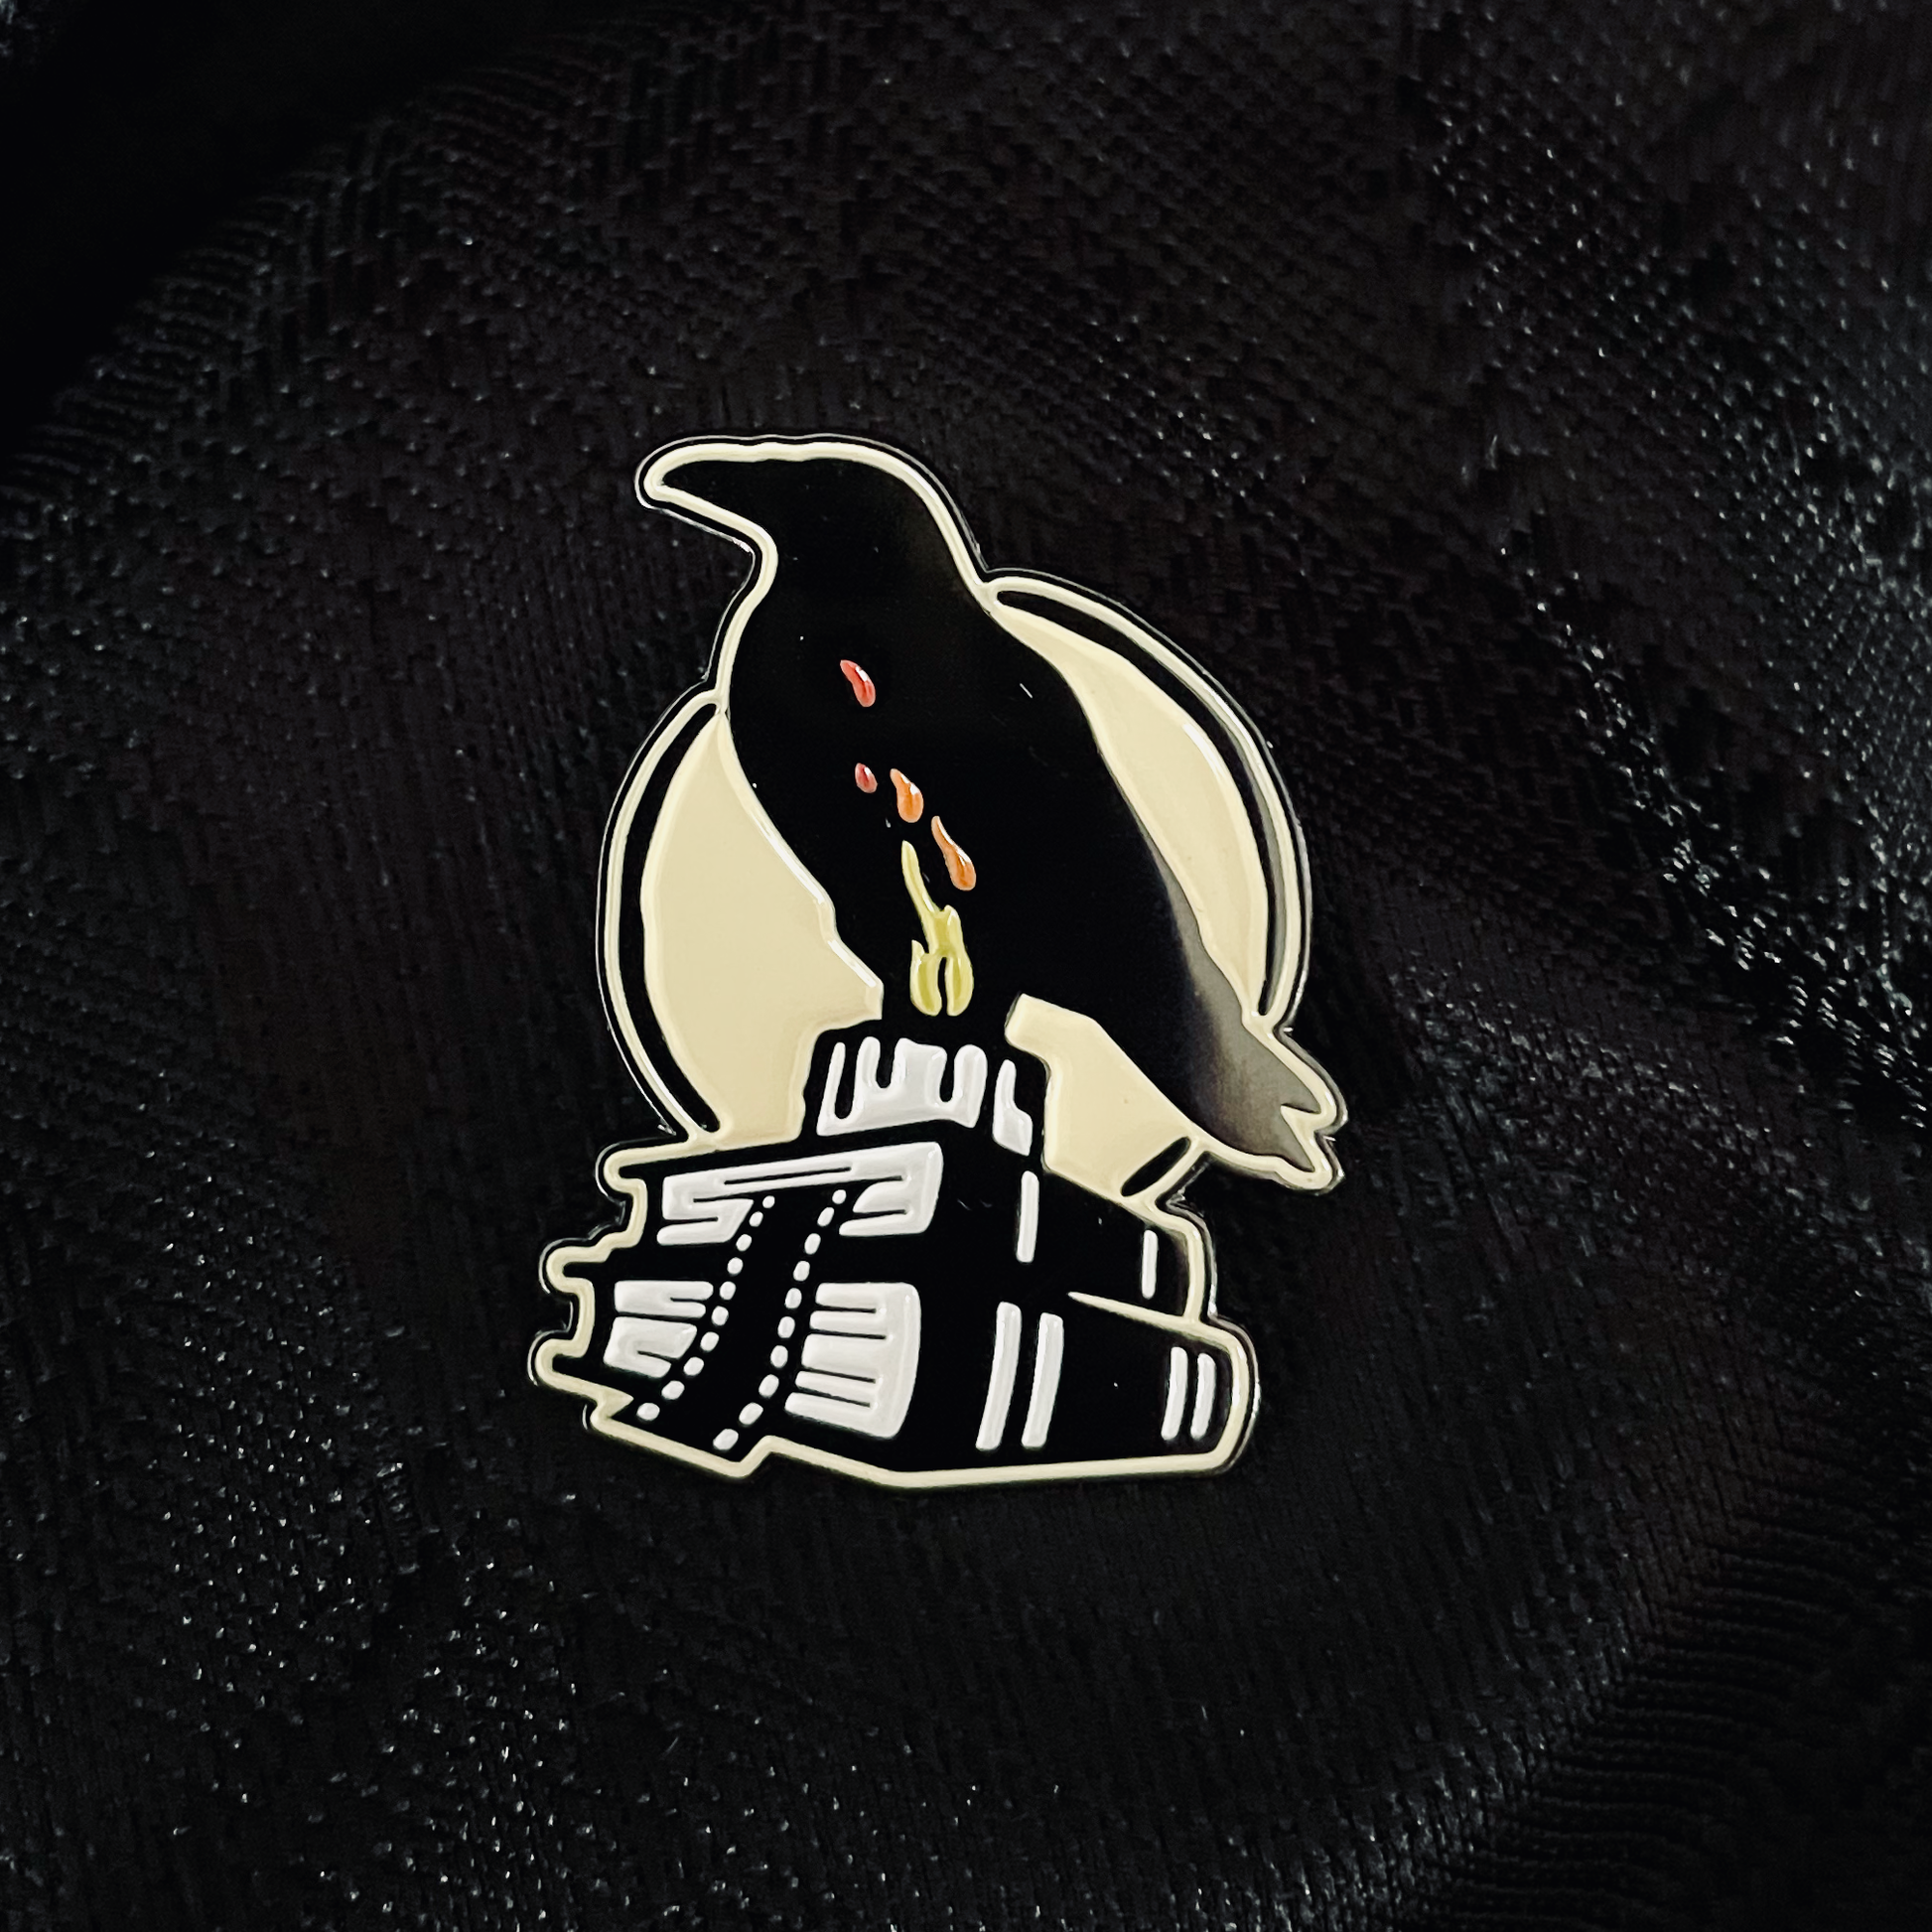 The Smell of Fear Enamel Pin - The Smell of Fear 